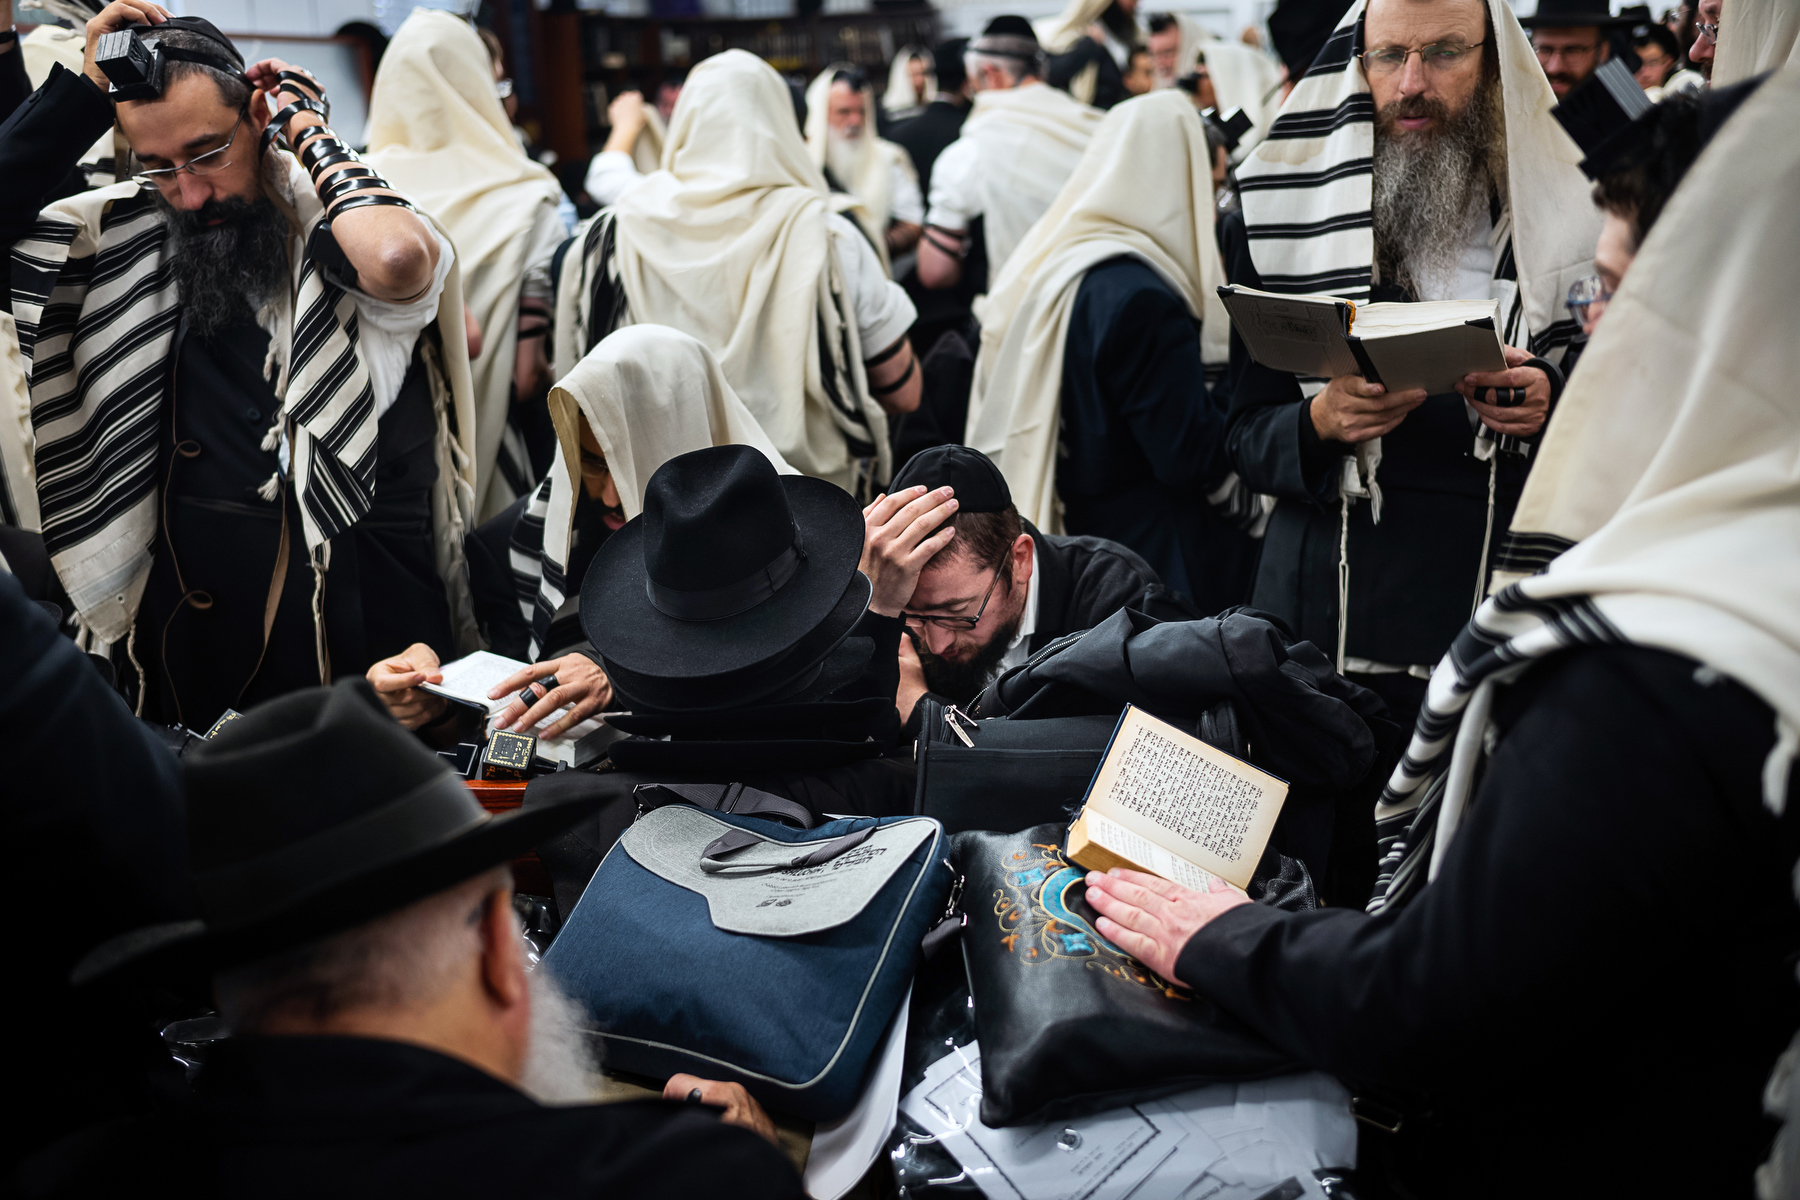  Chabad-Lubavitch rabbis read from prayer books in a building near the gravesite of the Lubavitcher Rebbe, Rabbi Menachem M. Schneerson, in Queens, NY. 